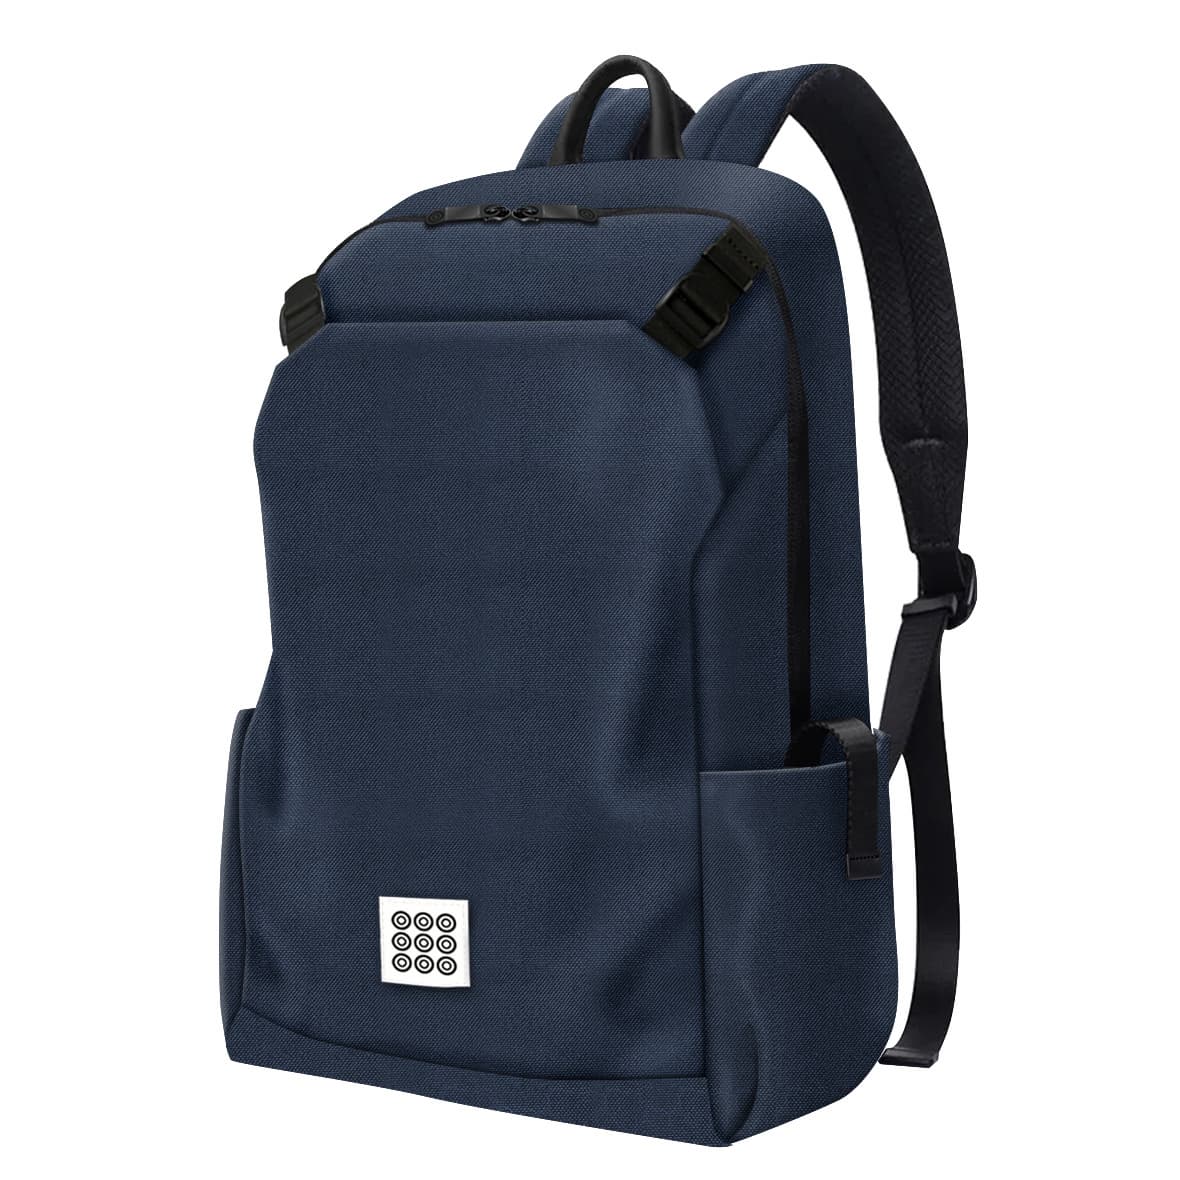 Onebody Laptop Backpack Bag_13 for Travel Business Casual